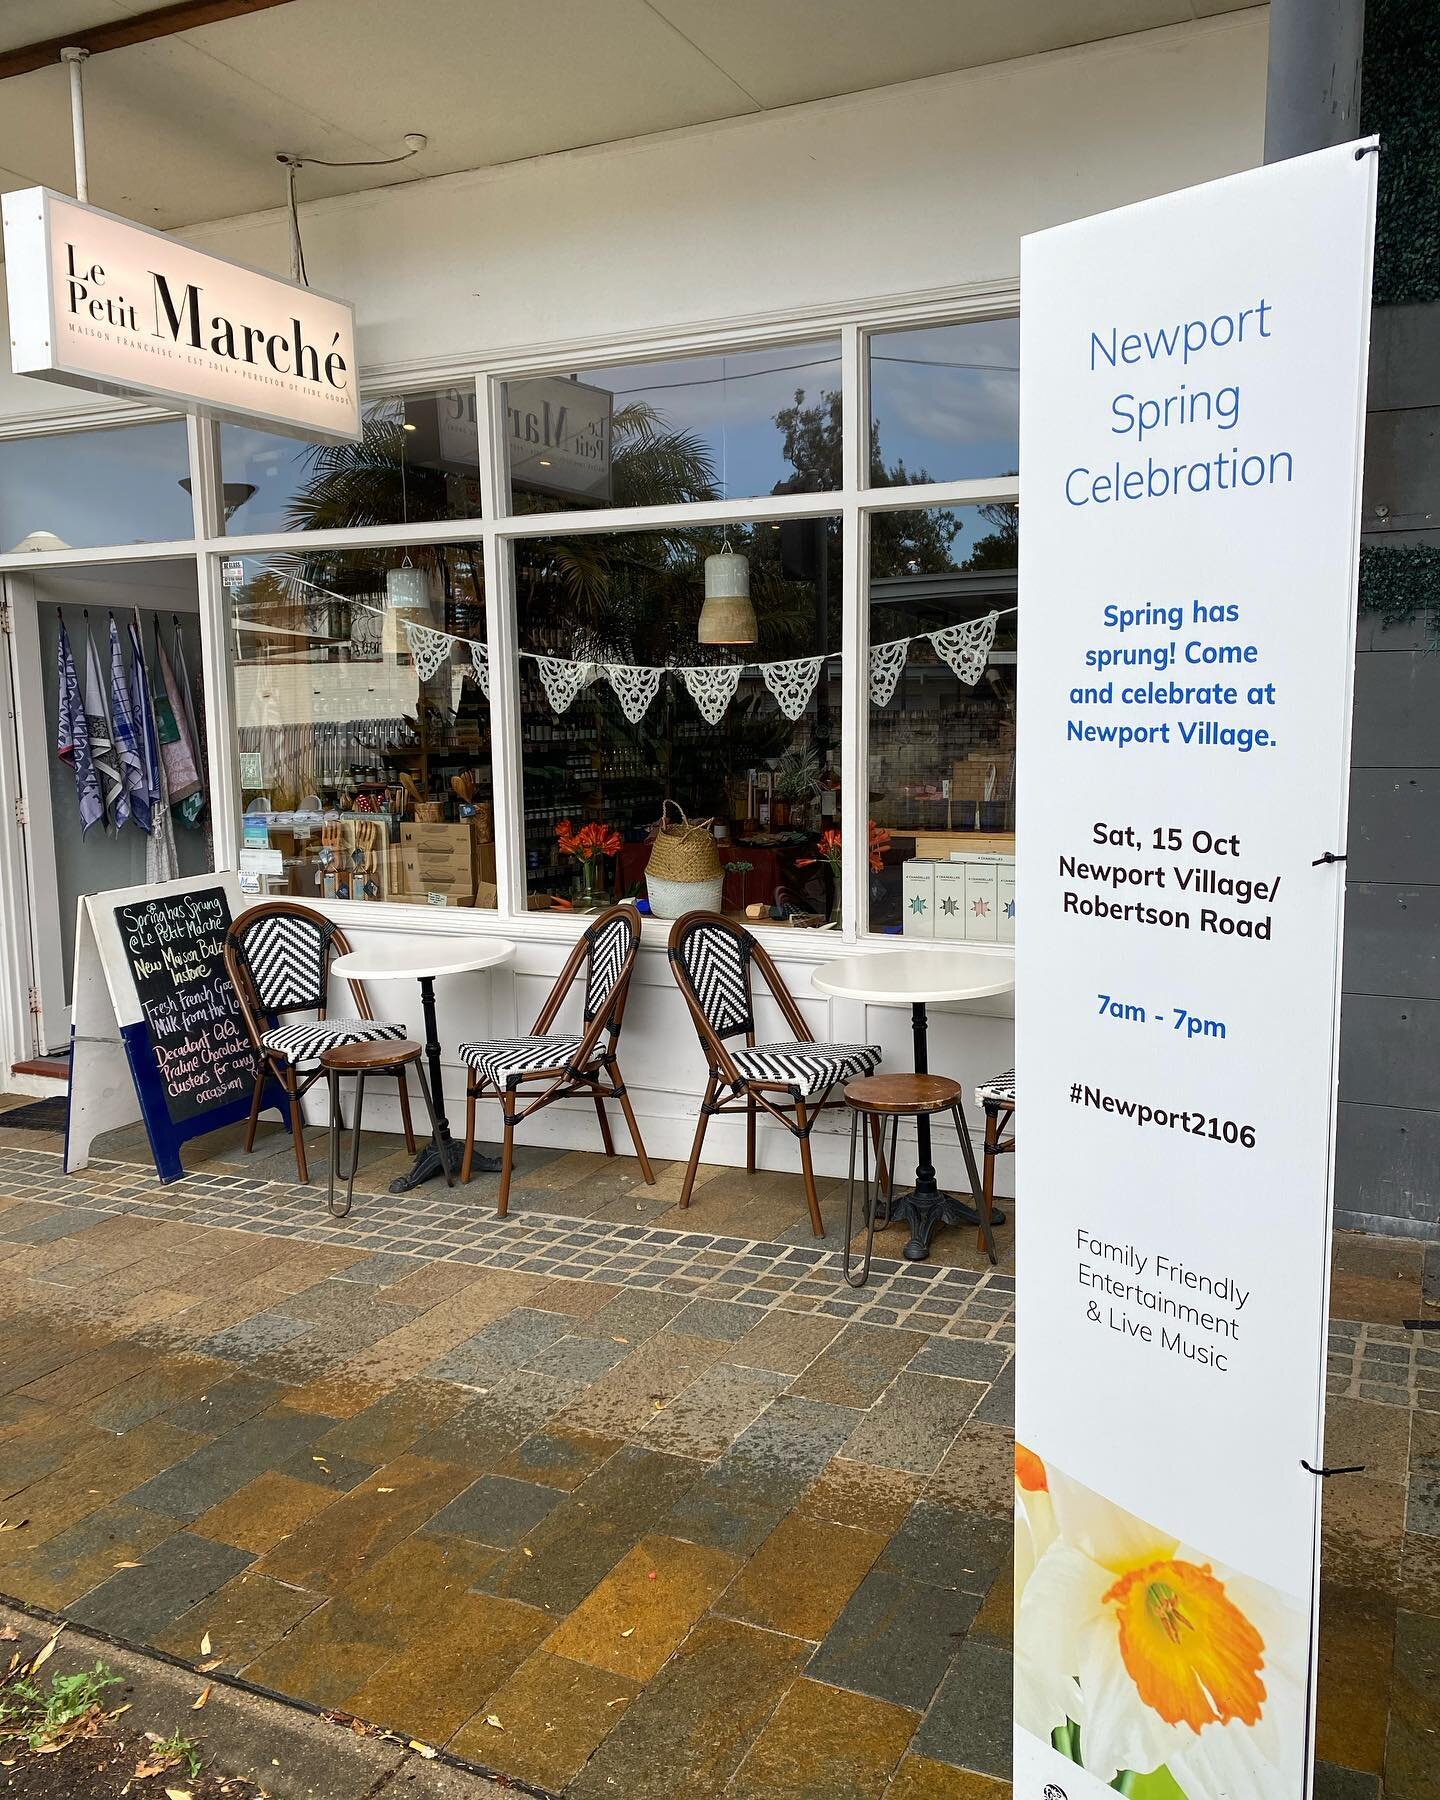 There&rsquo;ll be lots on offer at the Newport Spring Celebration event, so don&rsquo;t miss out.
Saturday 15th October 7am-7pm.  #newport2106 #newportspringcelebration #supportlocal #northernbeacheslocal #beachescouncil